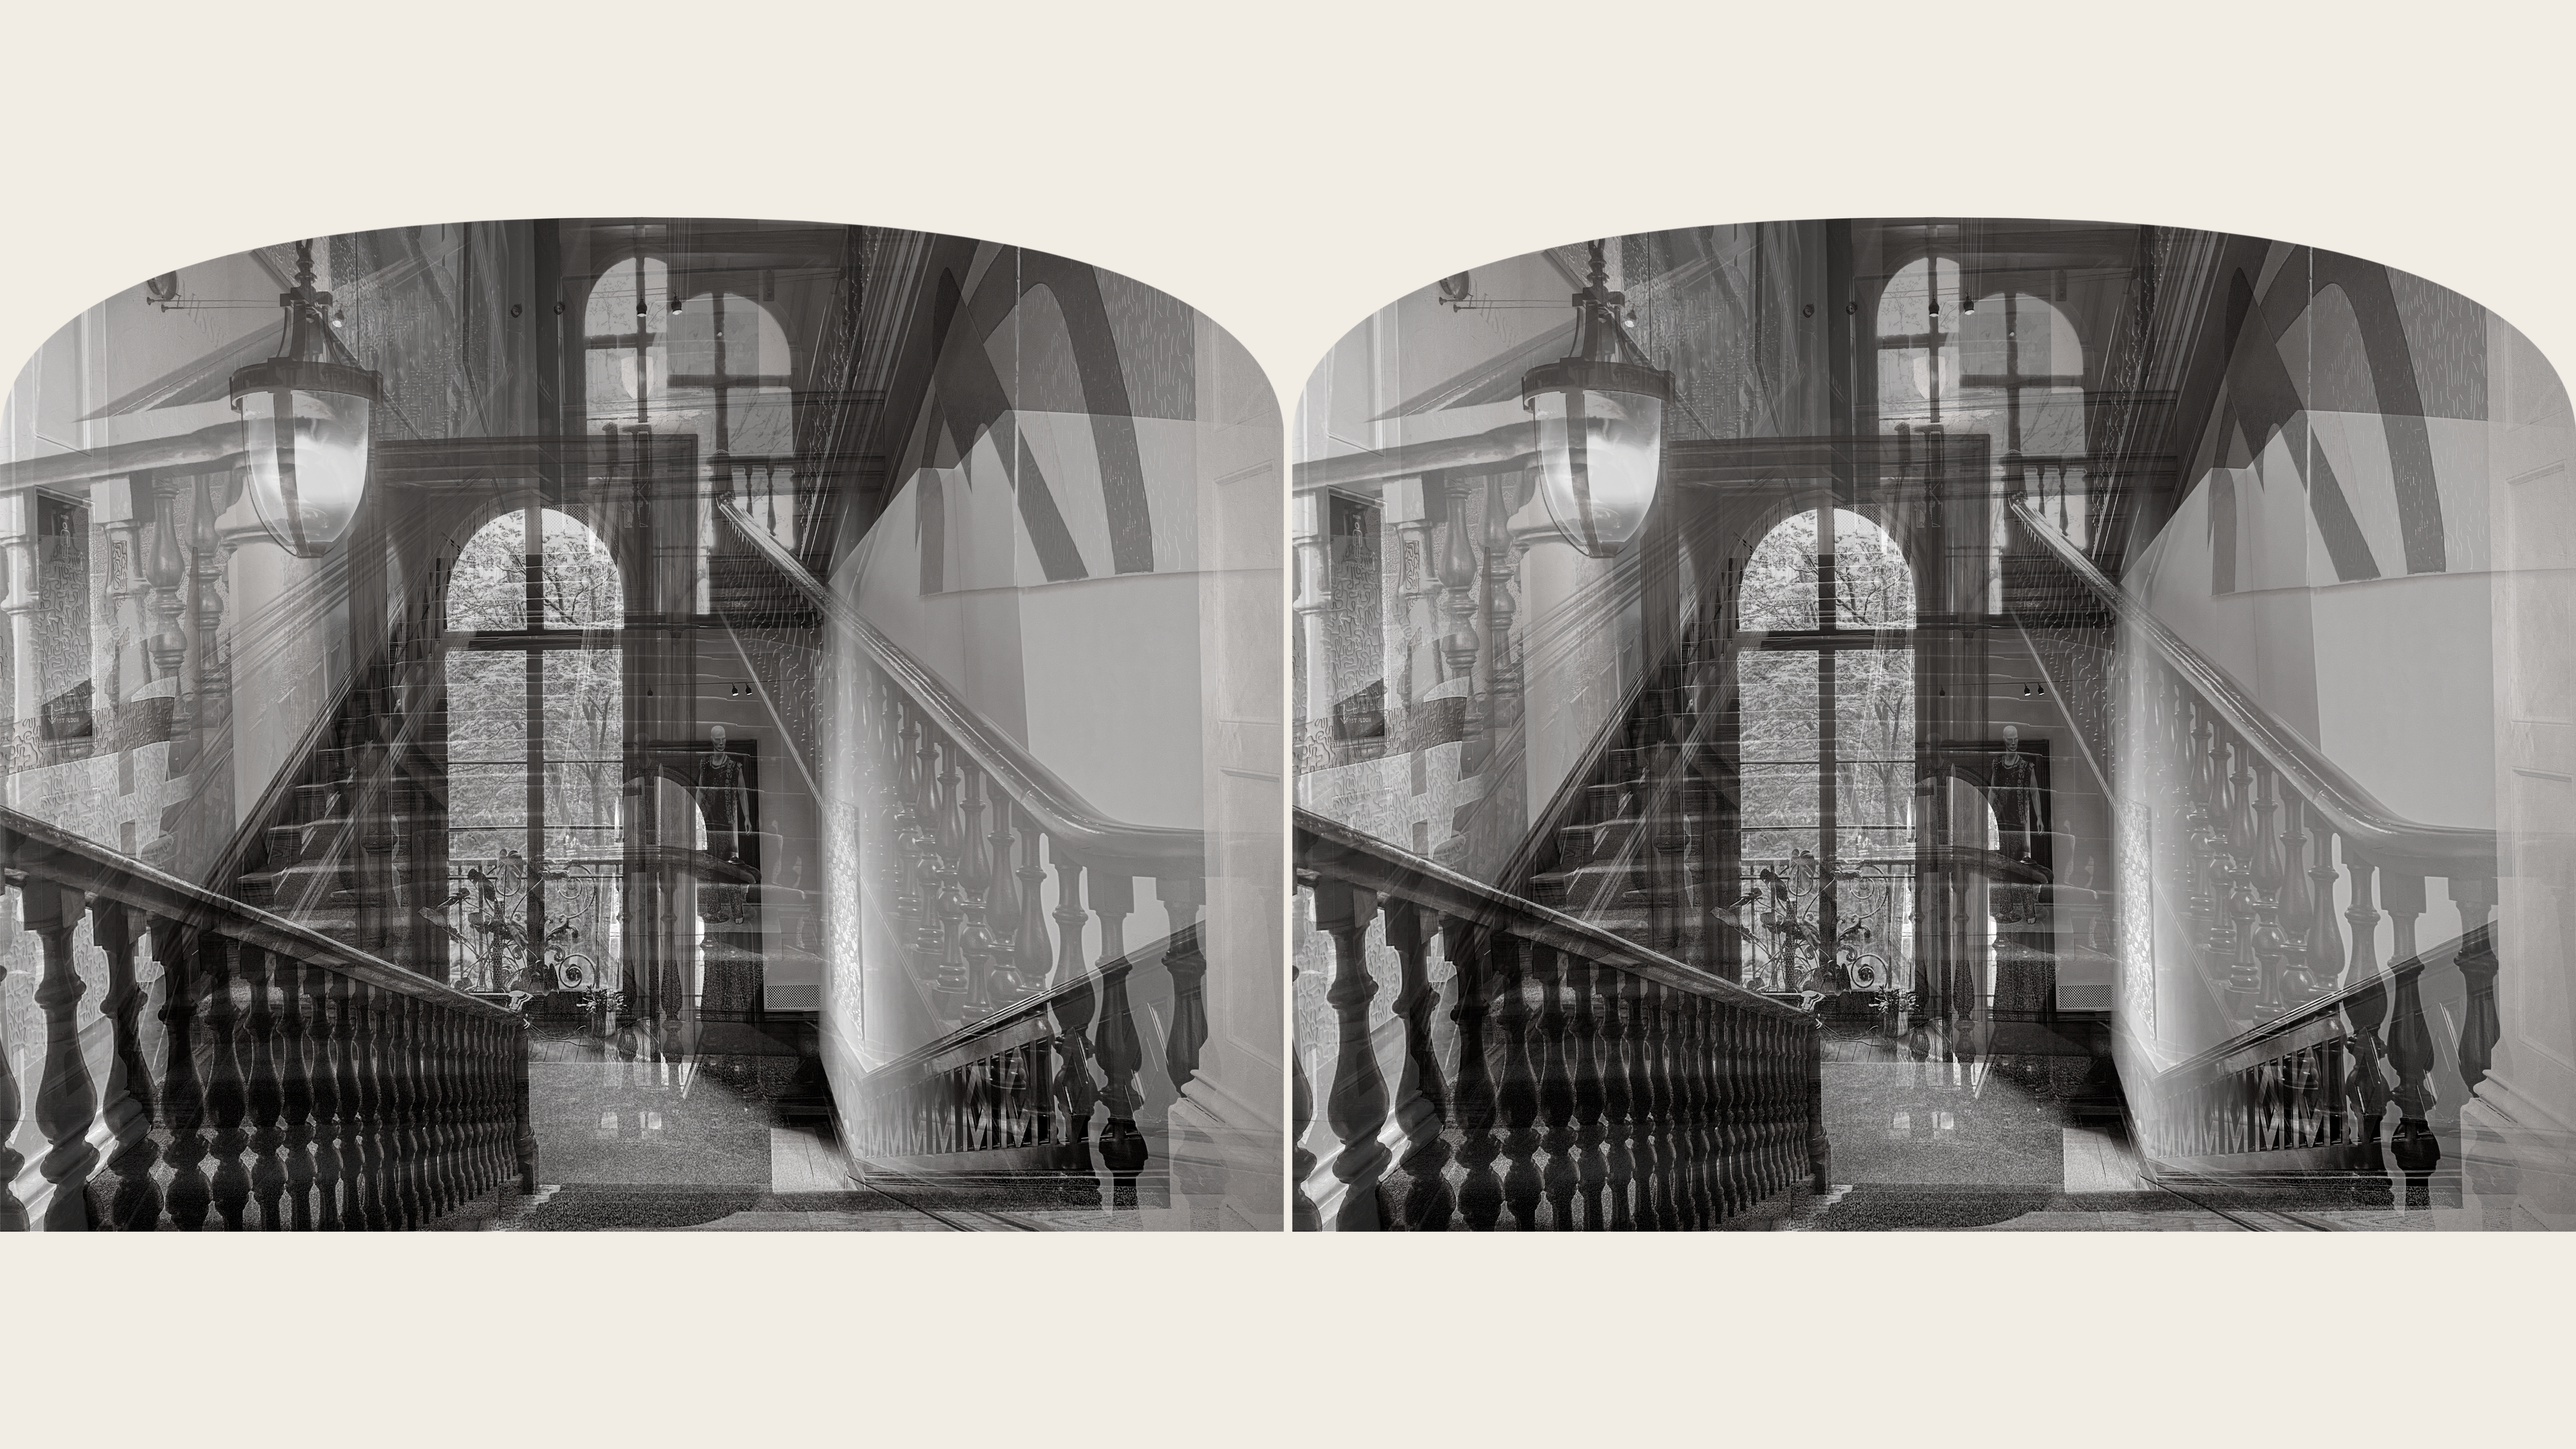 /A%20black-and-white%20stereoscopic%20image%20of%20Woods%20Gerry%20interior%20staircase.%20The%20symmetrical%20composition%20features%20mirrored%20perspectives%20and%20visible%20architectural%20details%2C%20creating%20a%20sense%20of%20movement%20and%20capturing%20the%20site%27s%20dynamic%20experience.